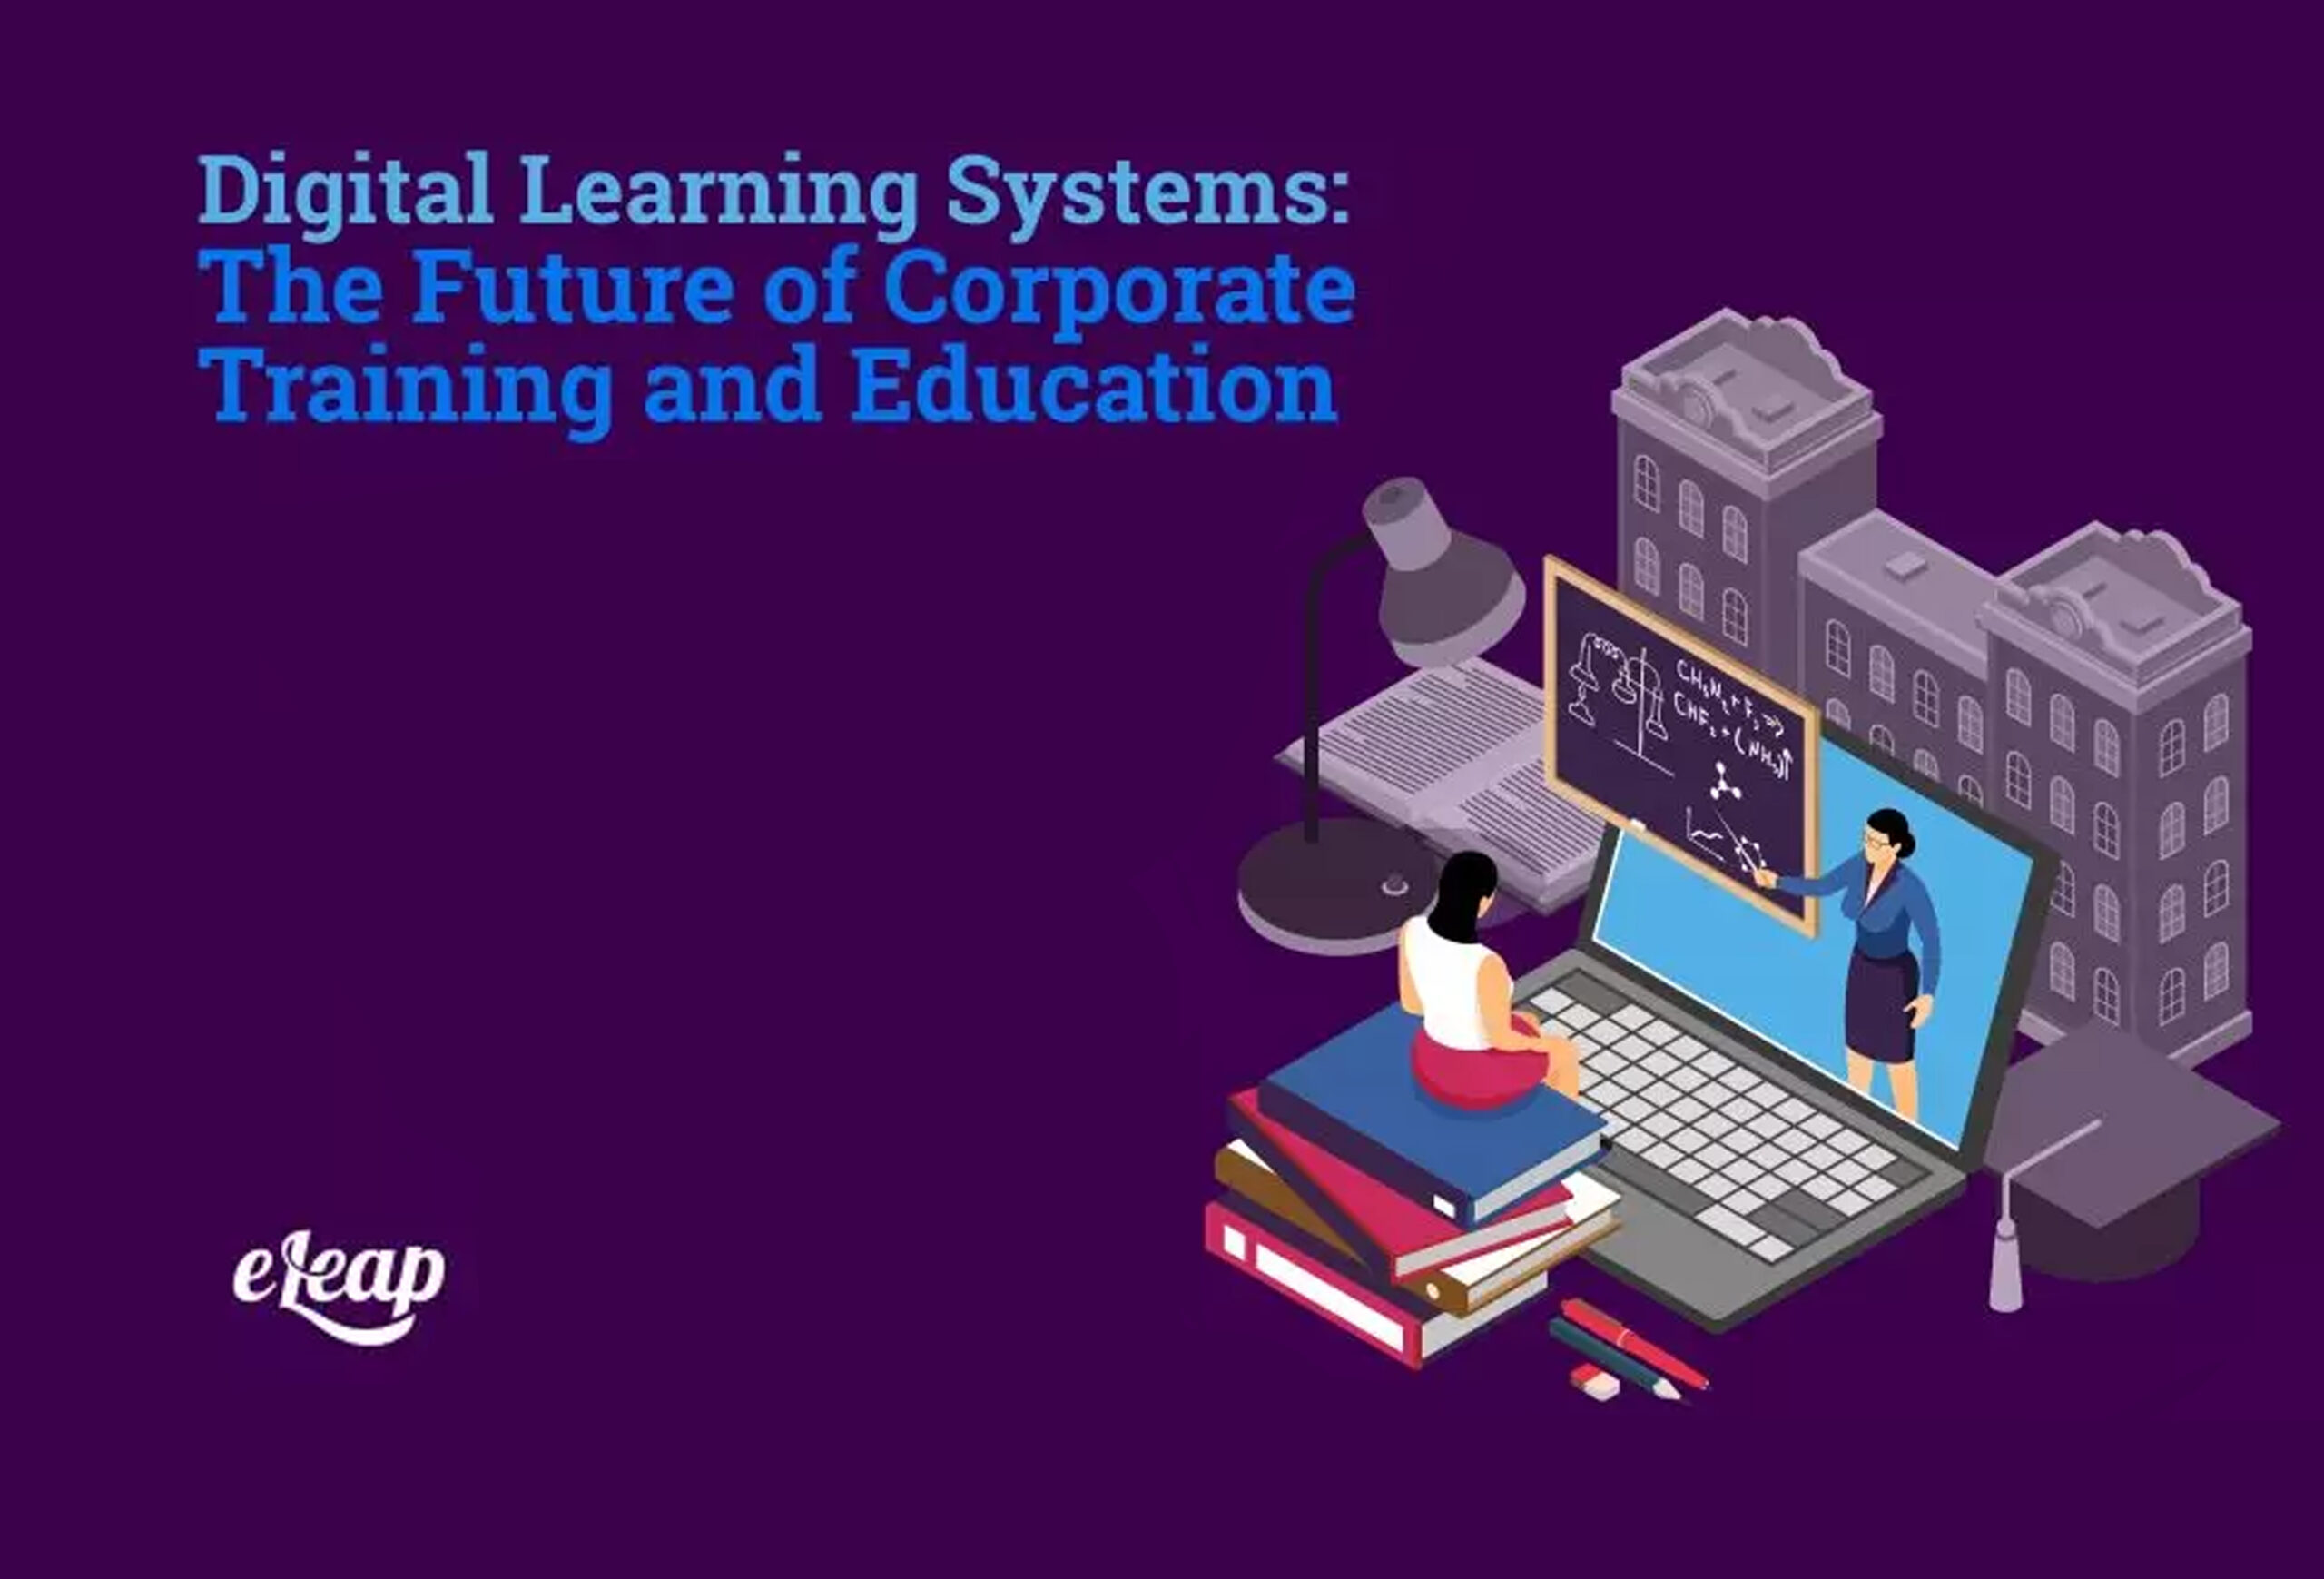 Digital Learning Systems: The Future of Corporate Training and Education